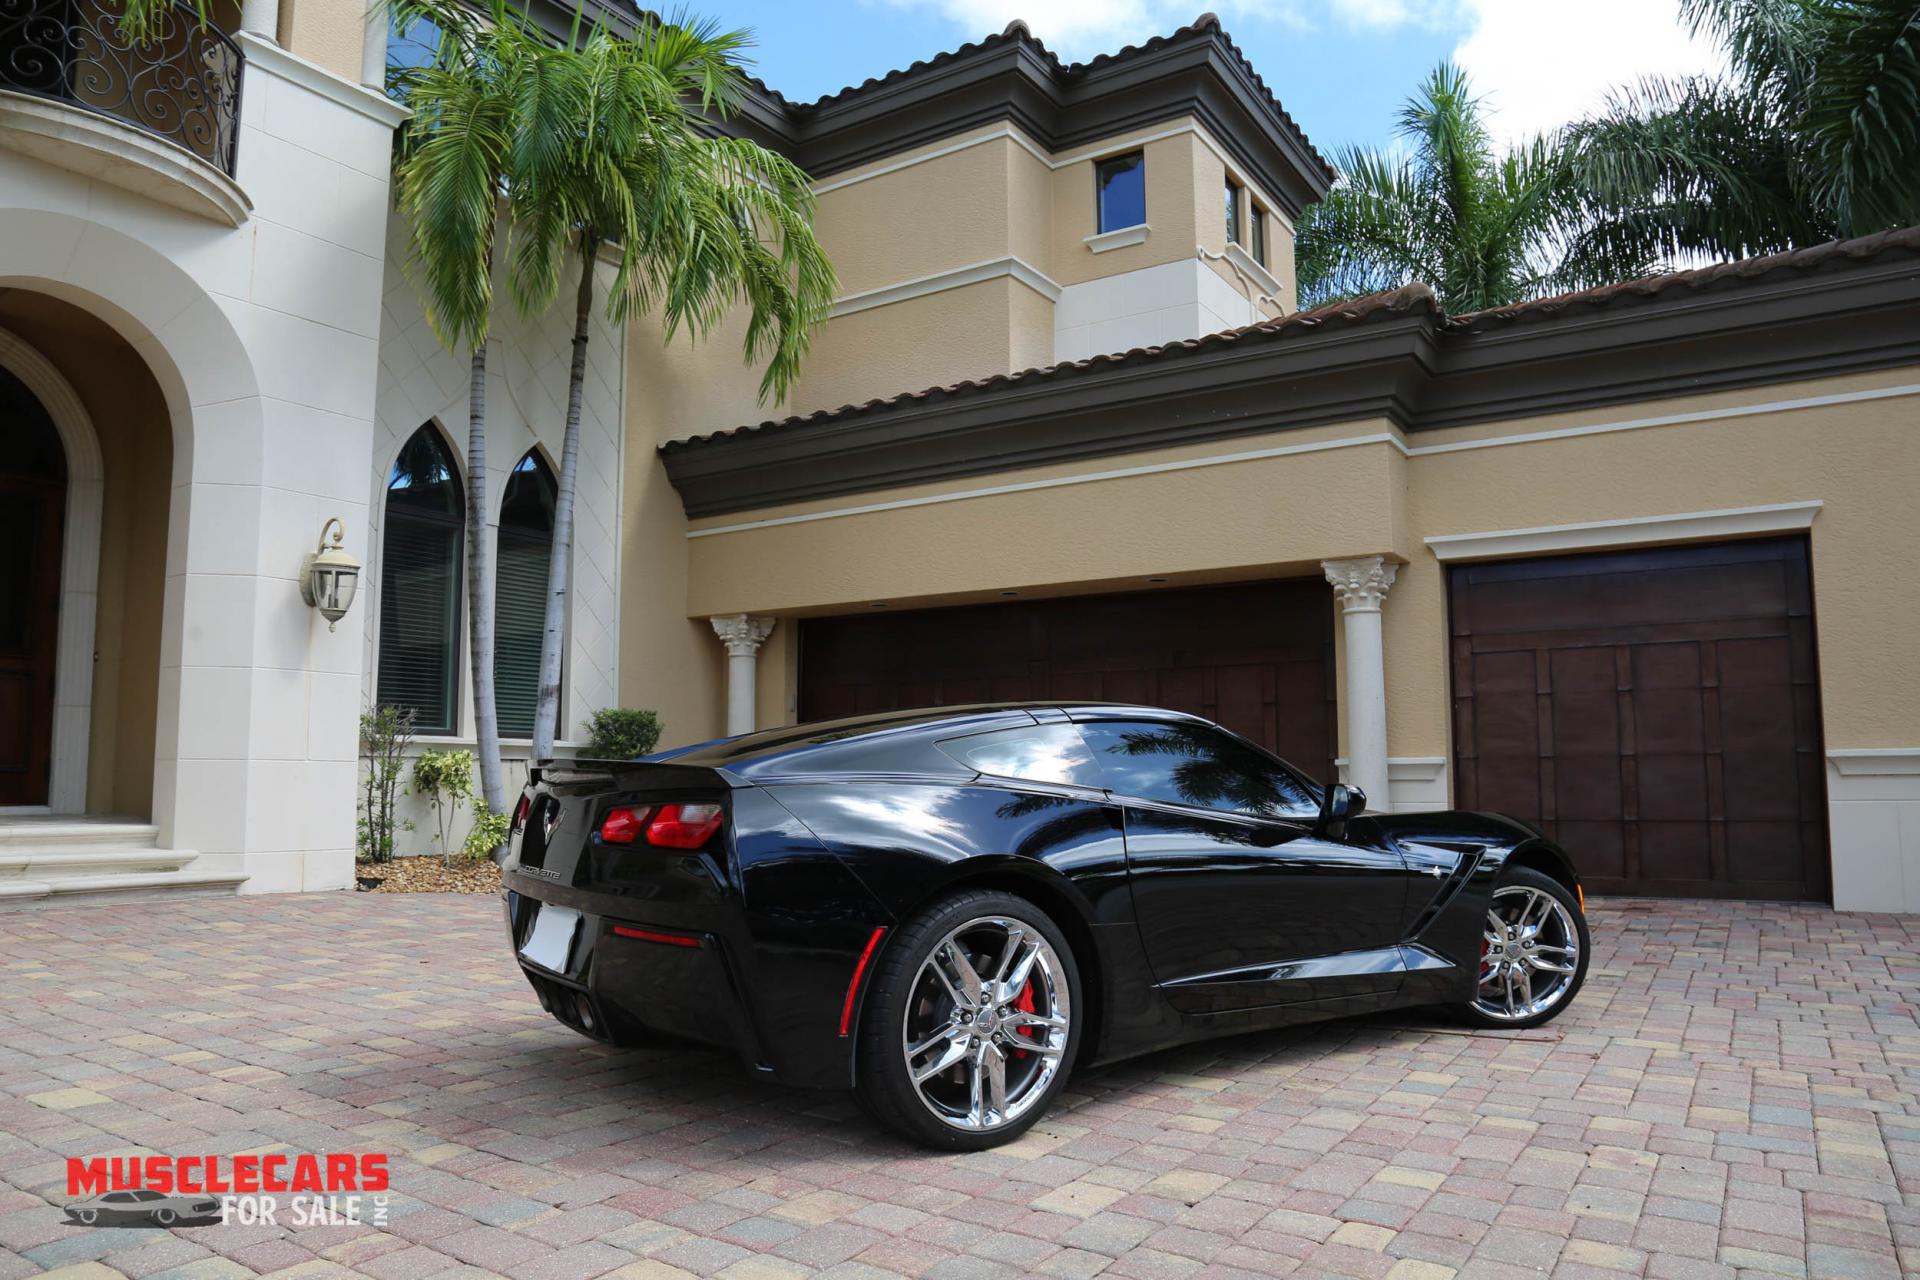 Used 2015 Chevrolet Corvette Stingray For Sale ($42,900) | Muscle Cars ...